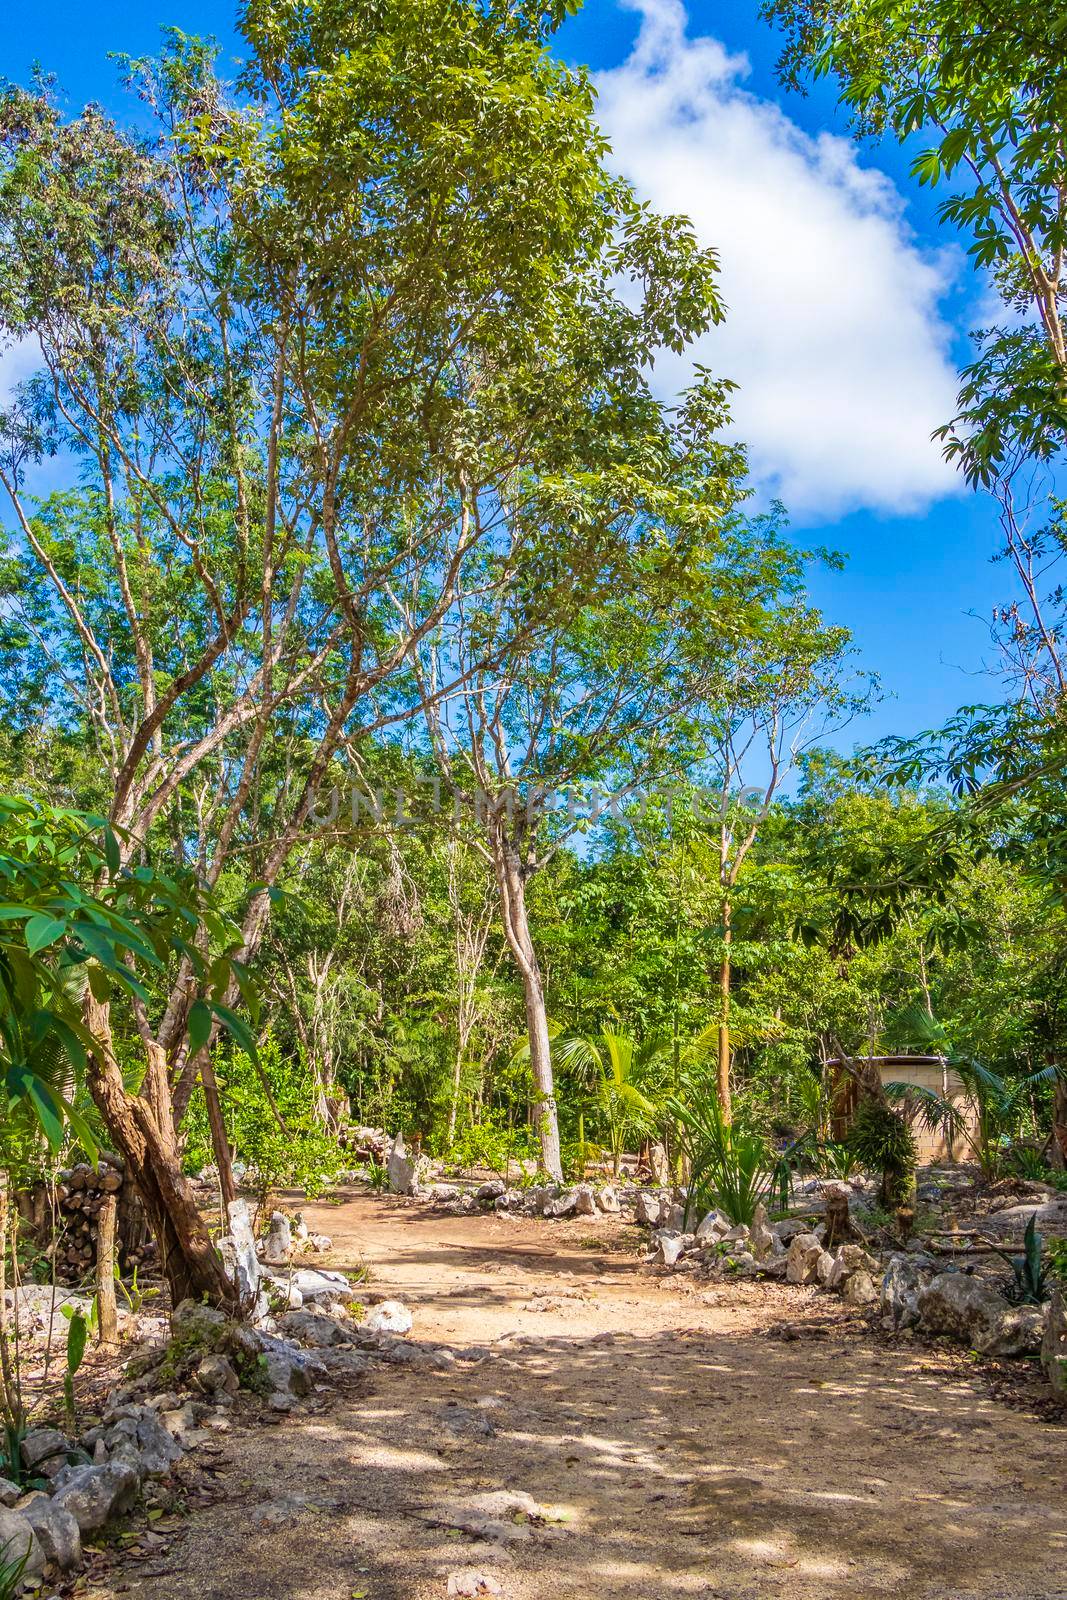 Tropical mexican jungle plants trees and natural forest panorama view in Puerto Aventuras Mexico.